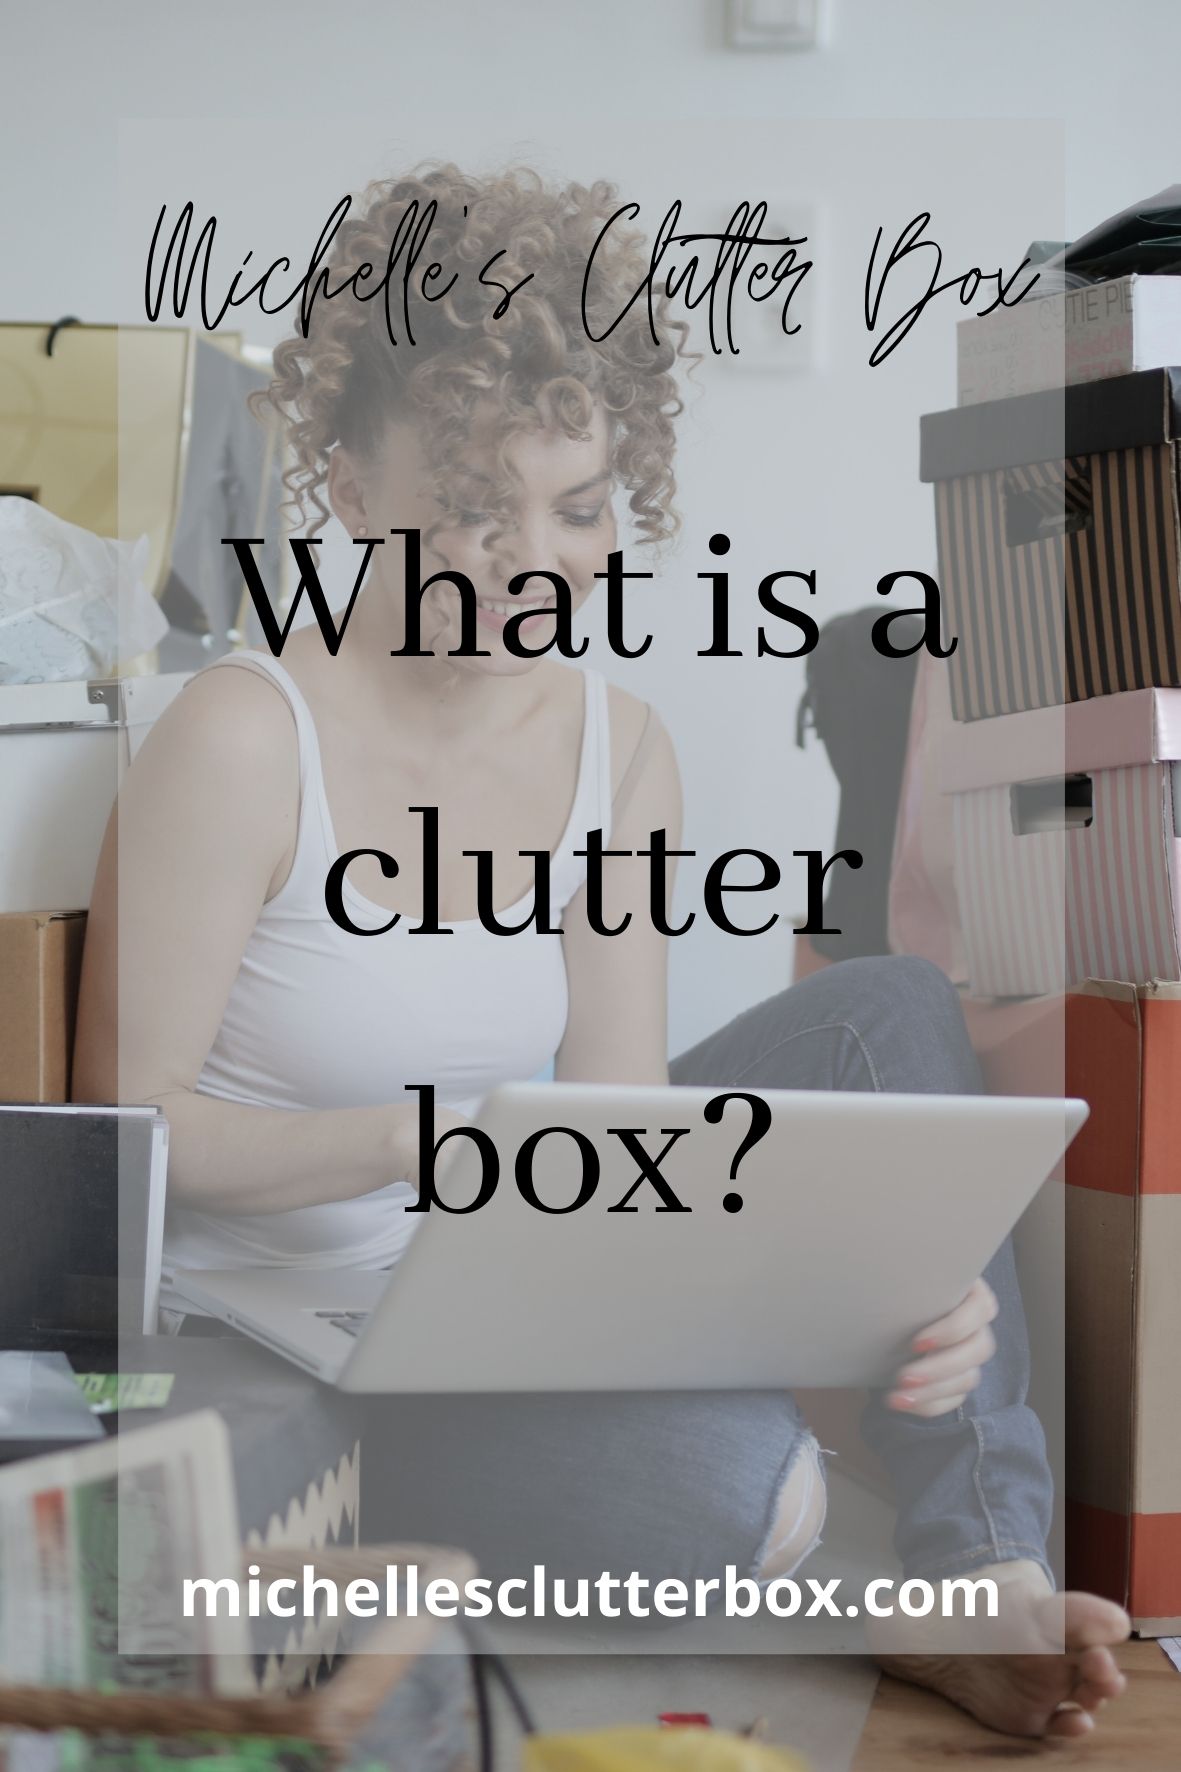 What is a clutter box?